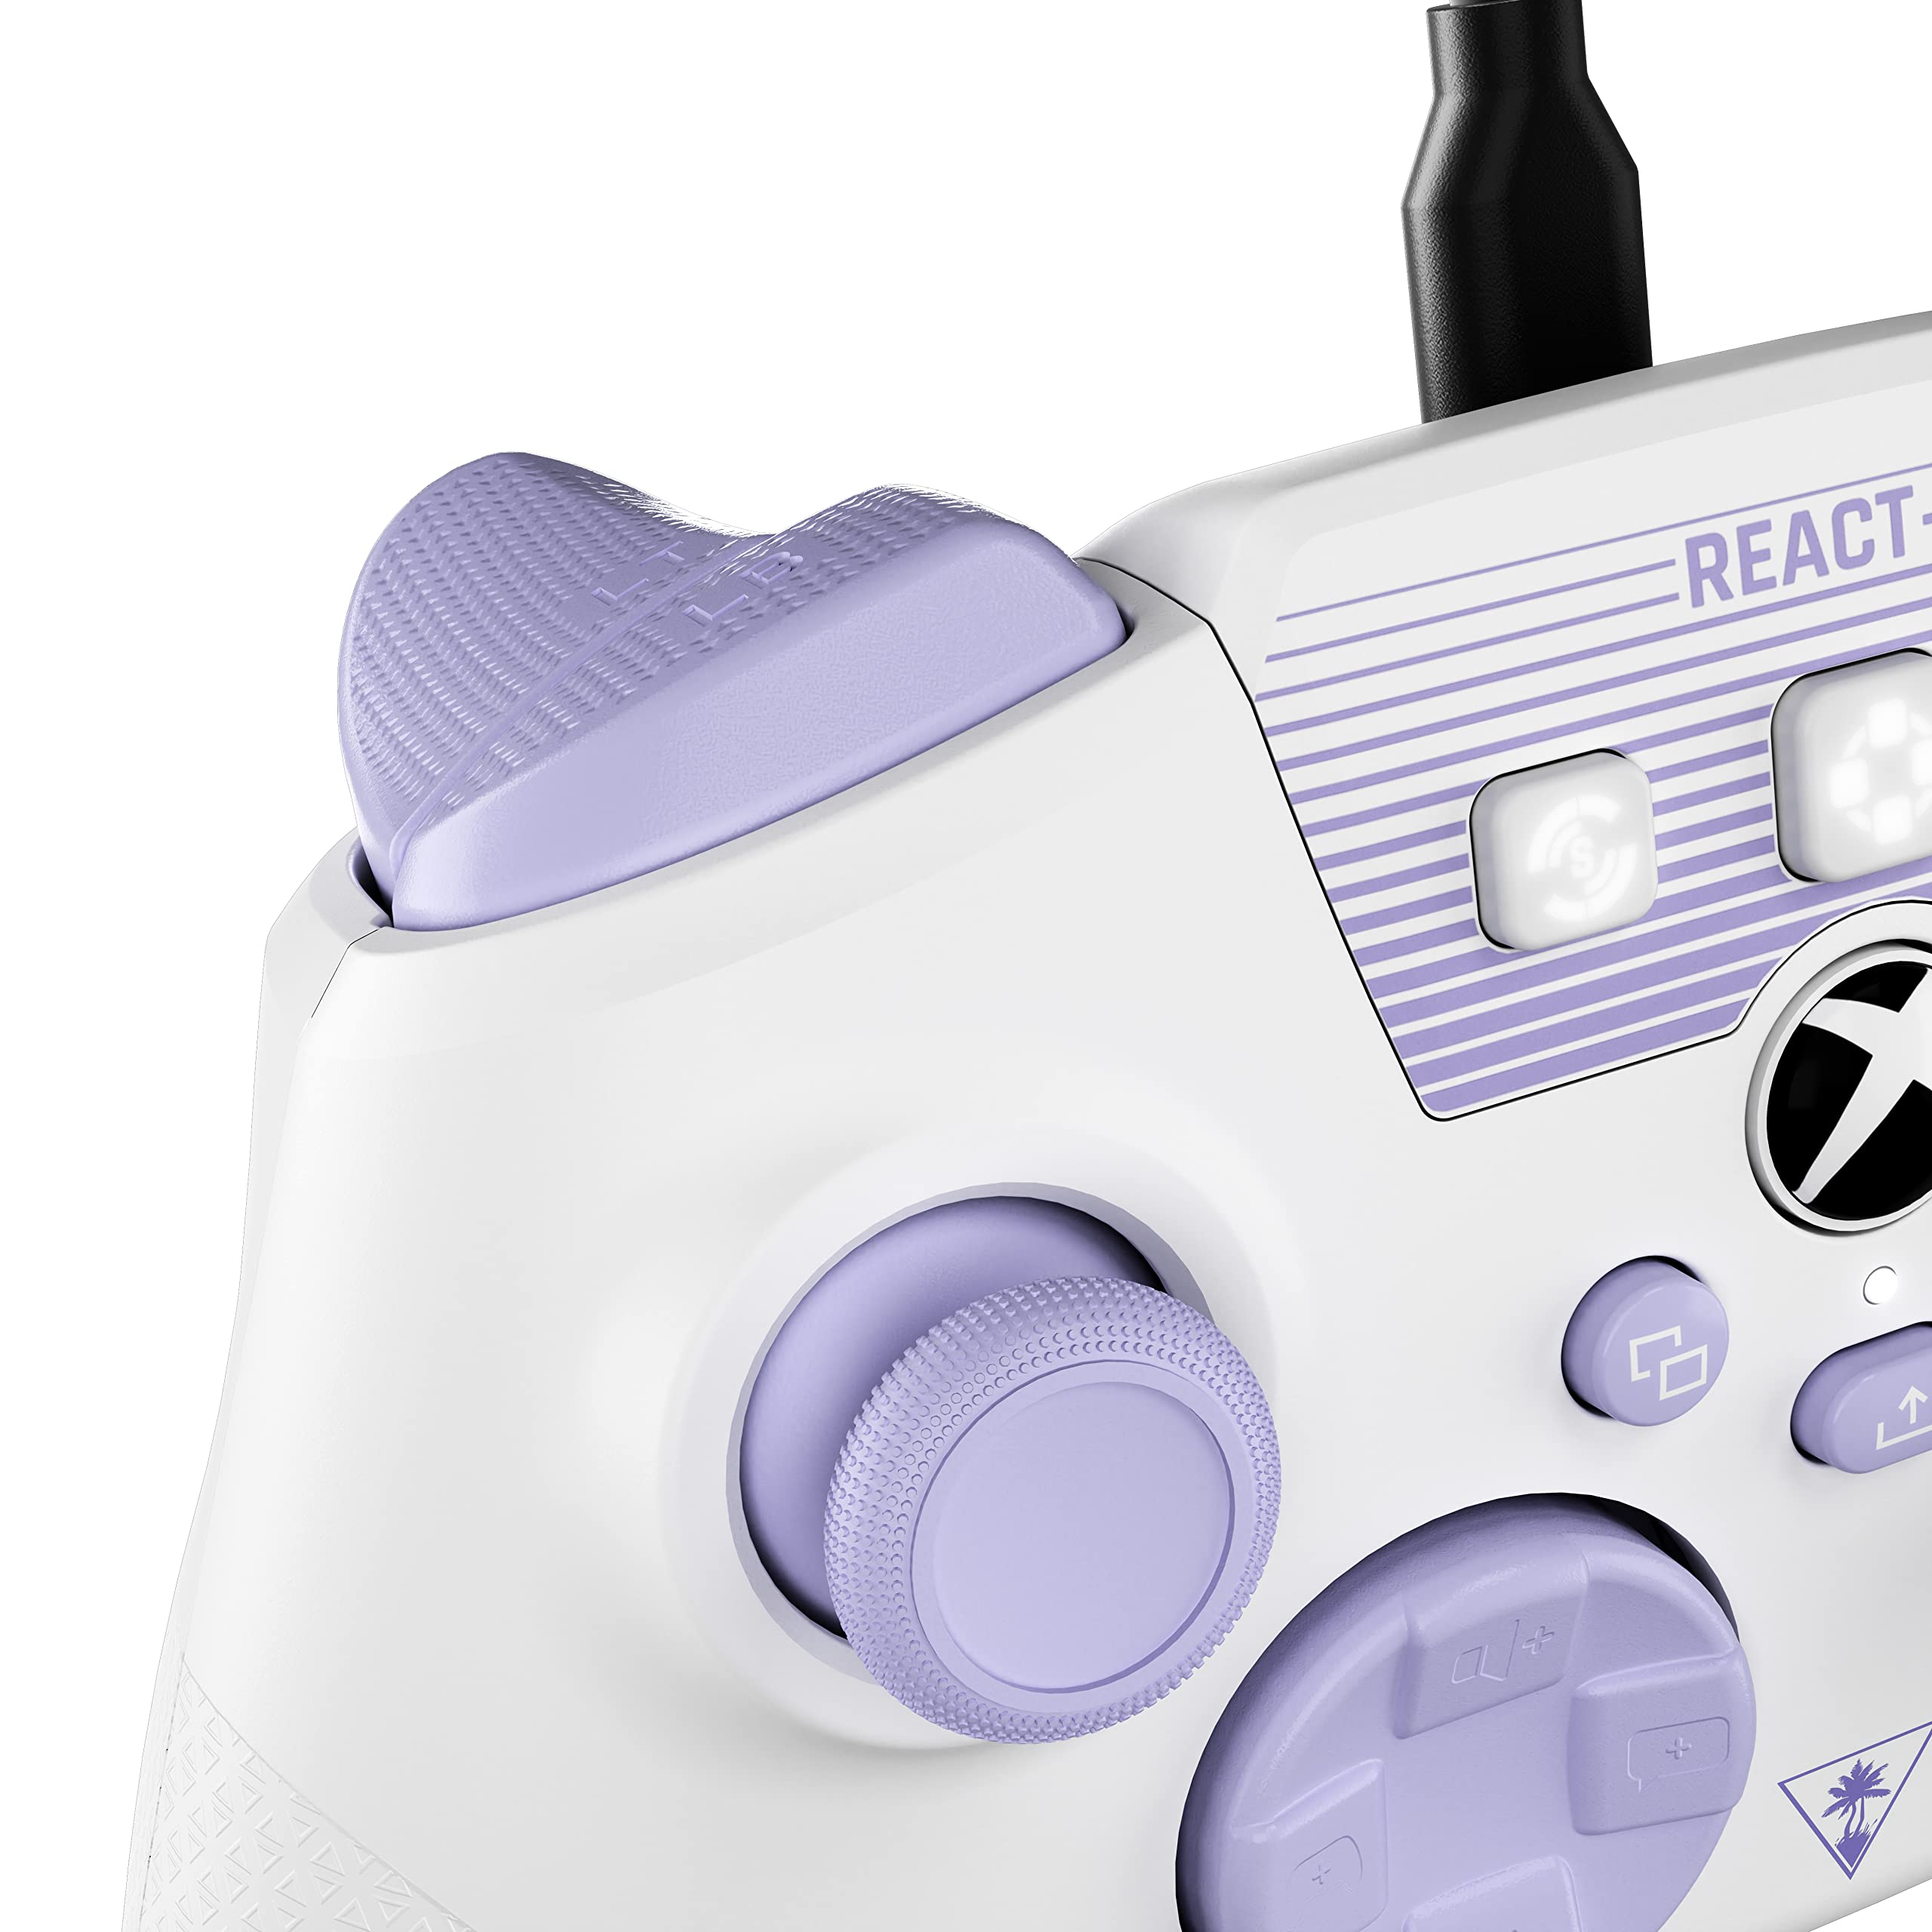 Turtle Beach REACT-R Wired Game Controller – Licensed for Xbox Series X & S, Xbox One & Windows – Audio Controls, Mappable Buttons, Textured Grips - White/Purple